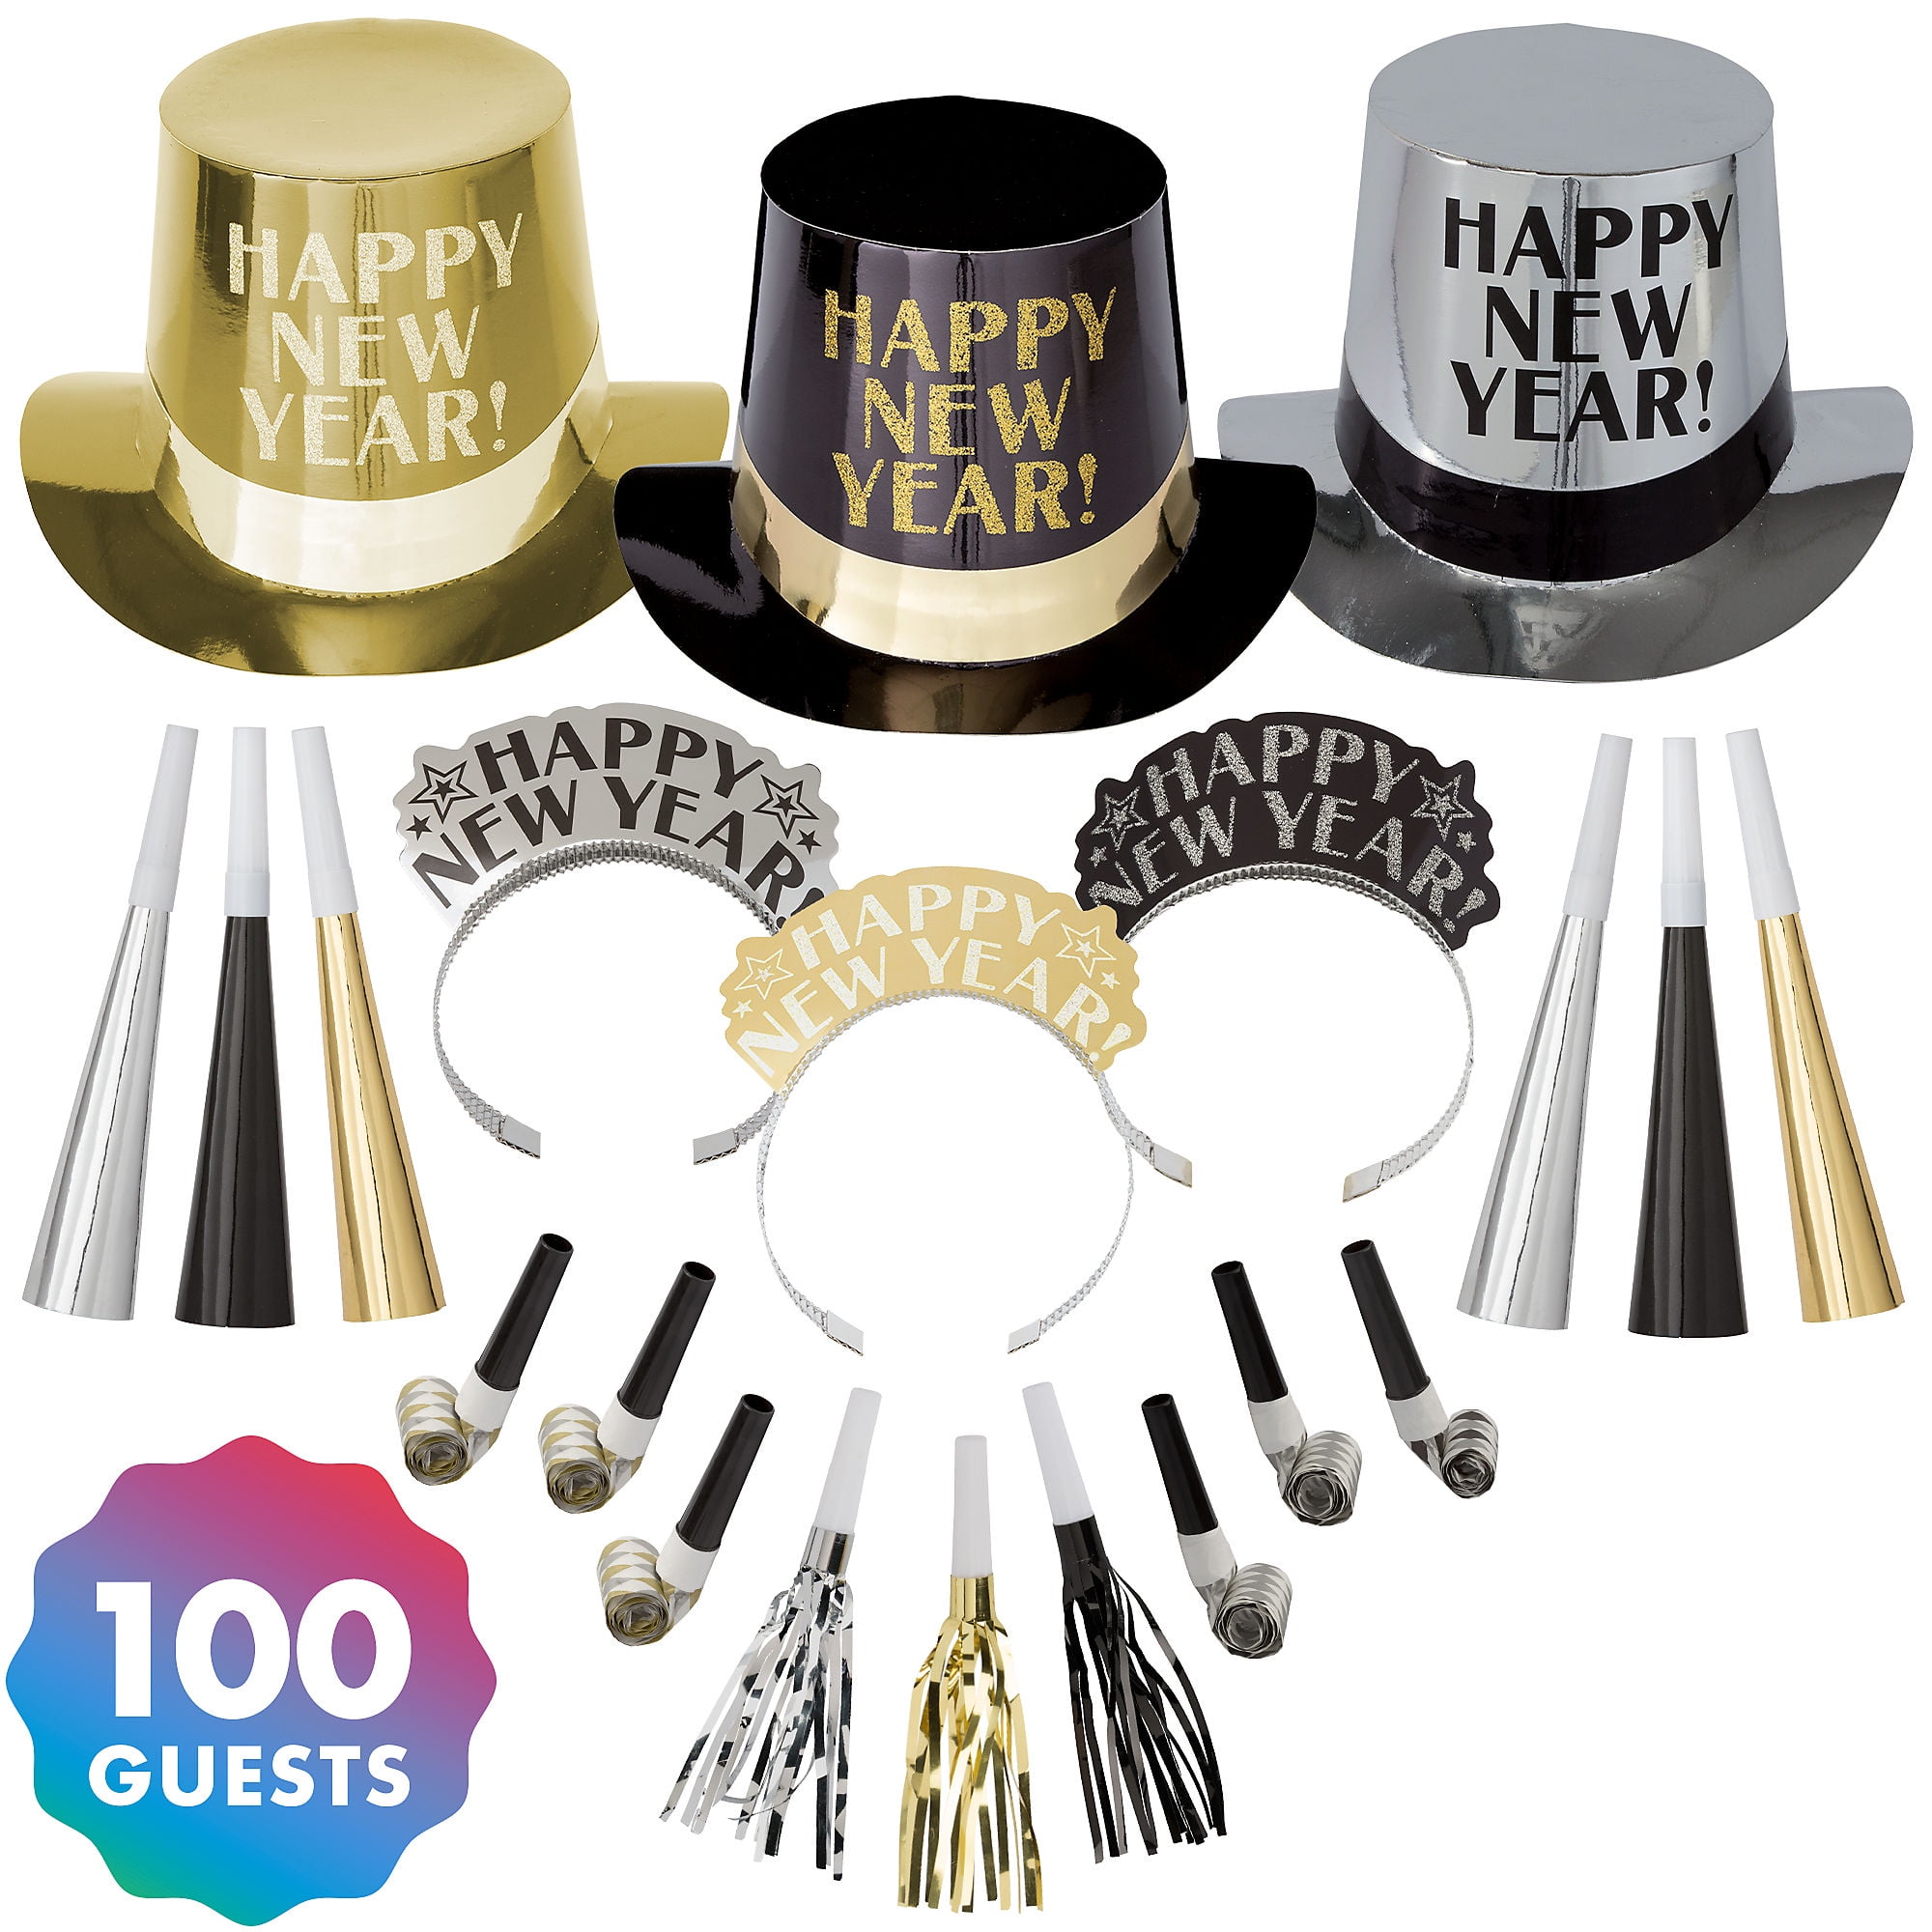 Happy New Year Eve 2018 Deluxe Headband Top Hat Party Headwear Photo Booth Prop 